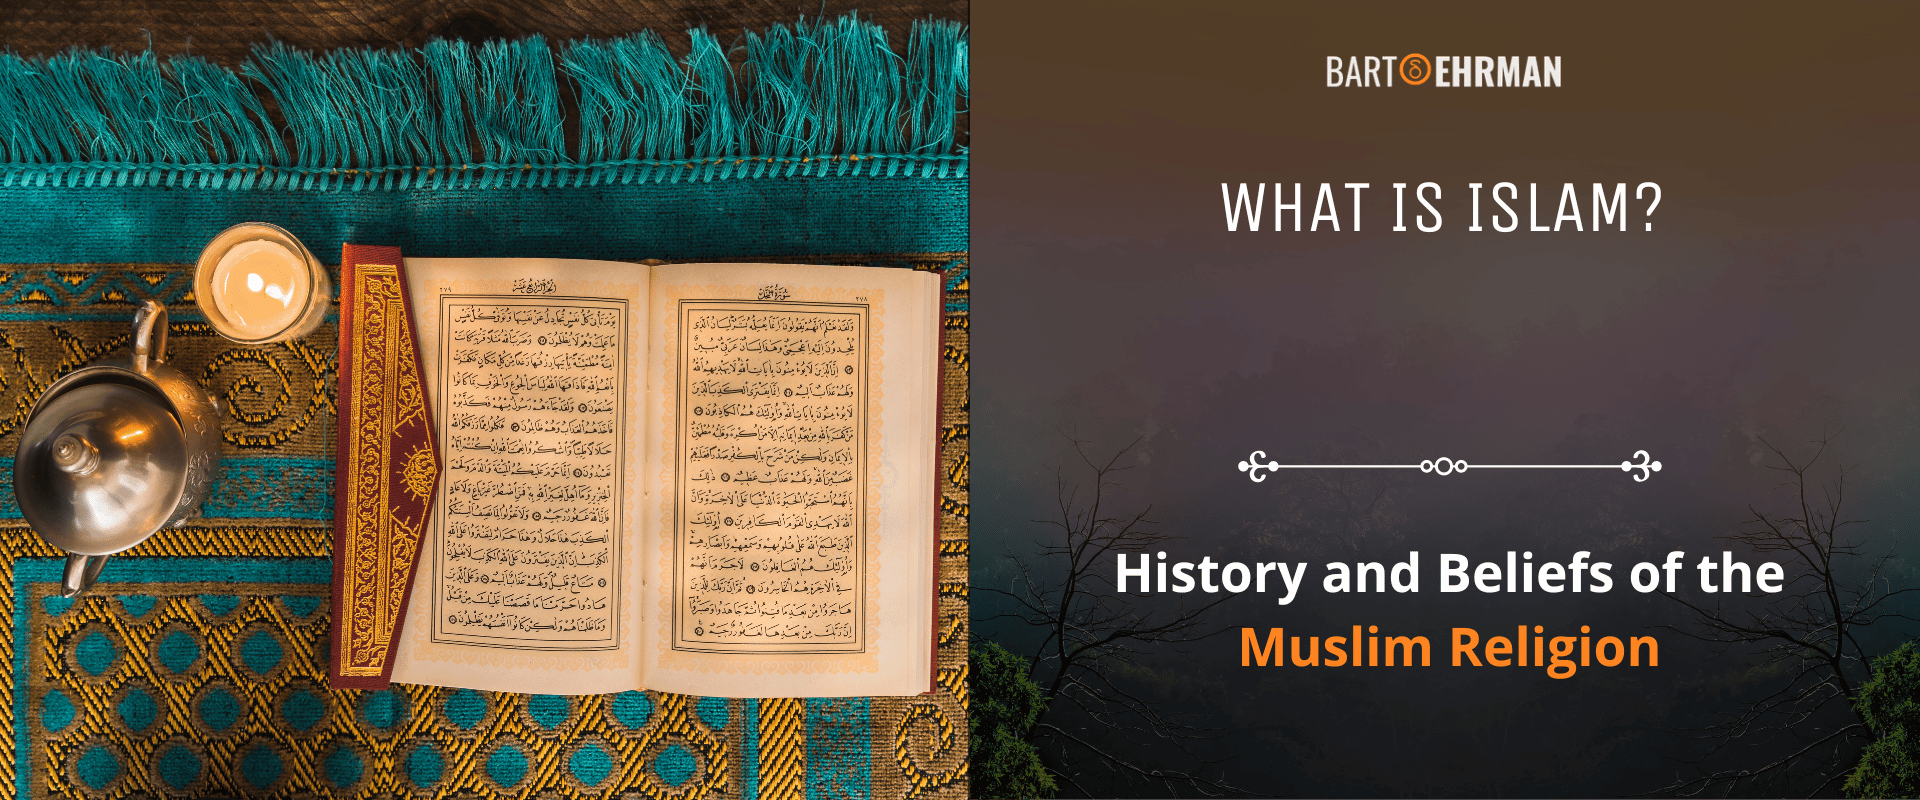 What is Islam - History and Beliefs of the Muslim Religion